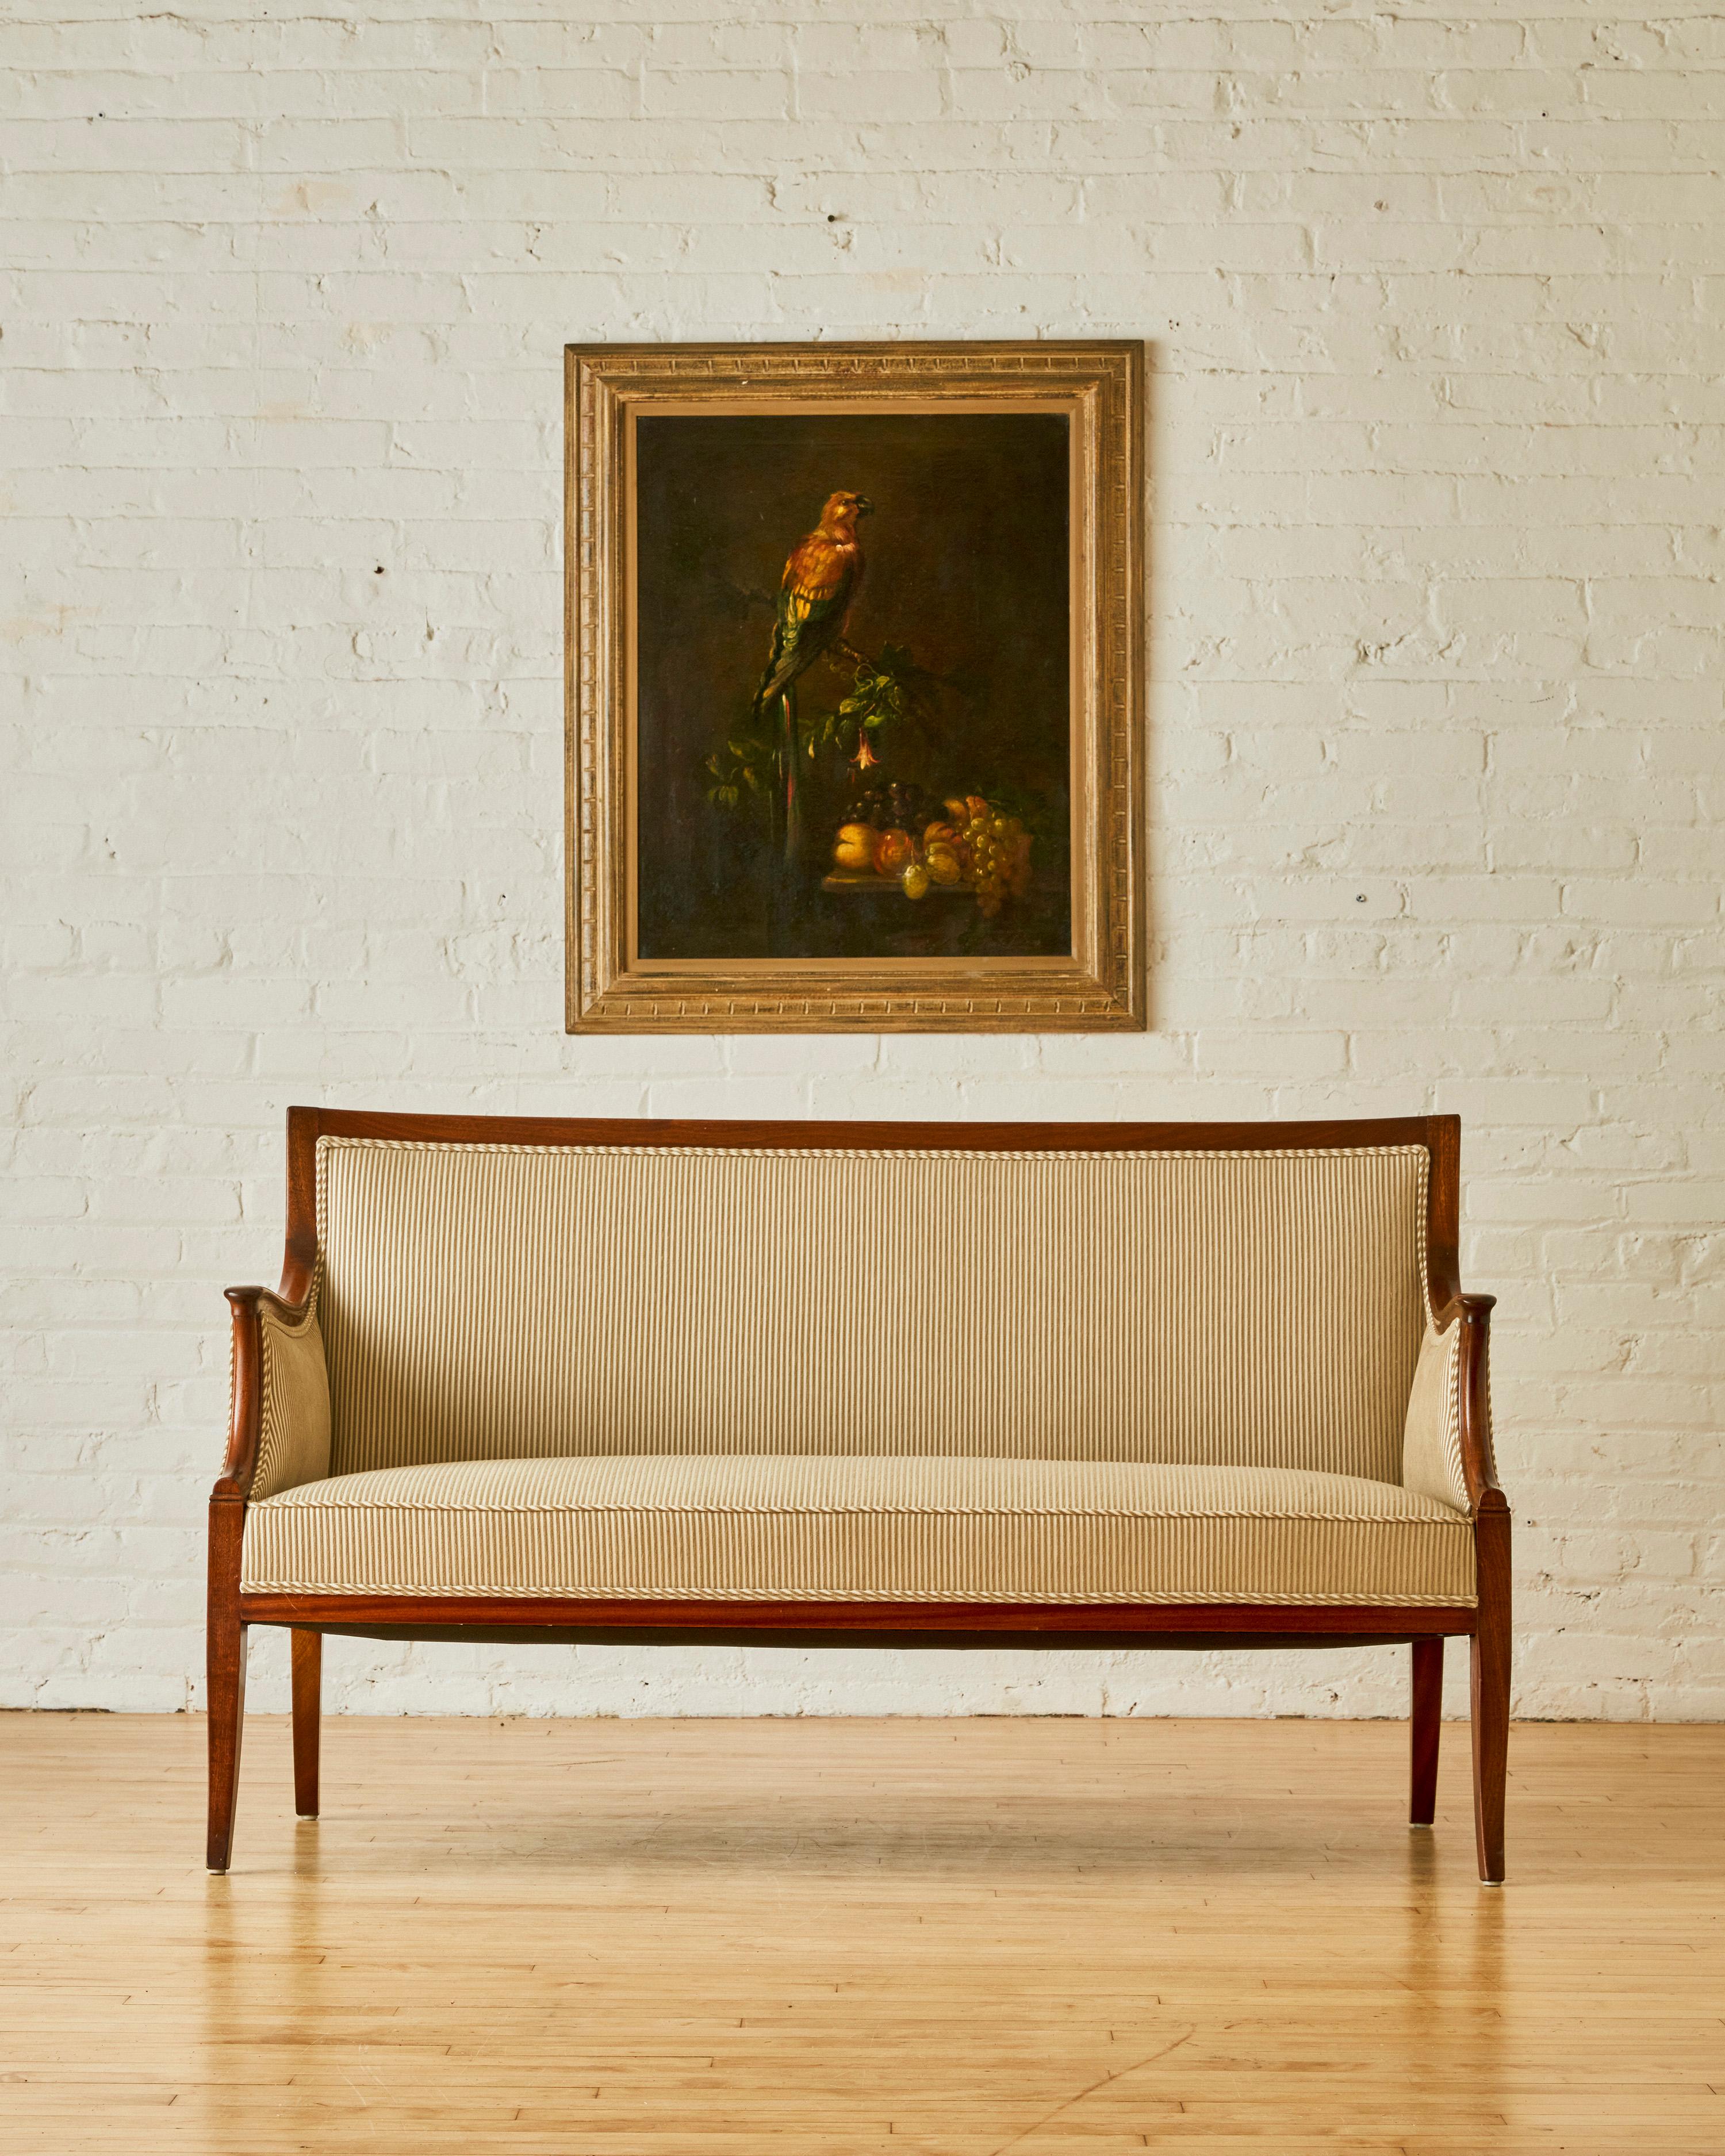 Danish Sette by Frits Henningsen, newly reupholstered in Rebelli - Leonia, Corda/Rope fabric with a mahogany wood frame. 

Frits Henningsen was a Danish furniture designer and cabinet maker who achieved high standards of quality with exclusively